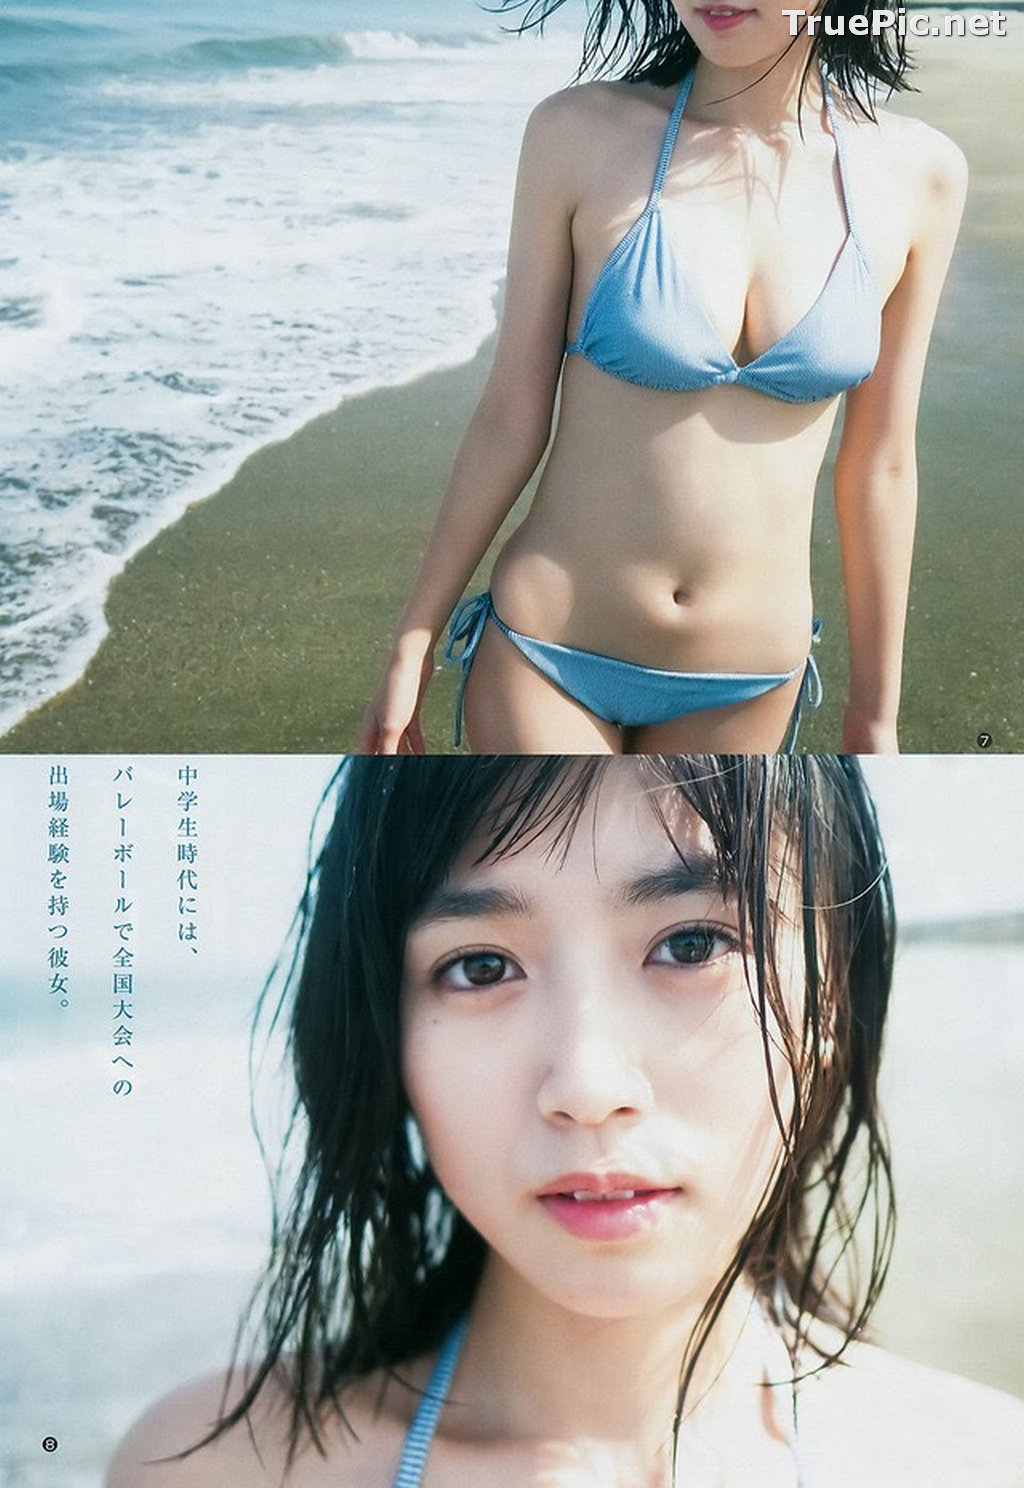 ImageJapanese Gravure Idol and Actress - Kitamuki Miyu (北向珠夕) - Sexy Picture Collection 2020 - TruePic.net - Picture-124